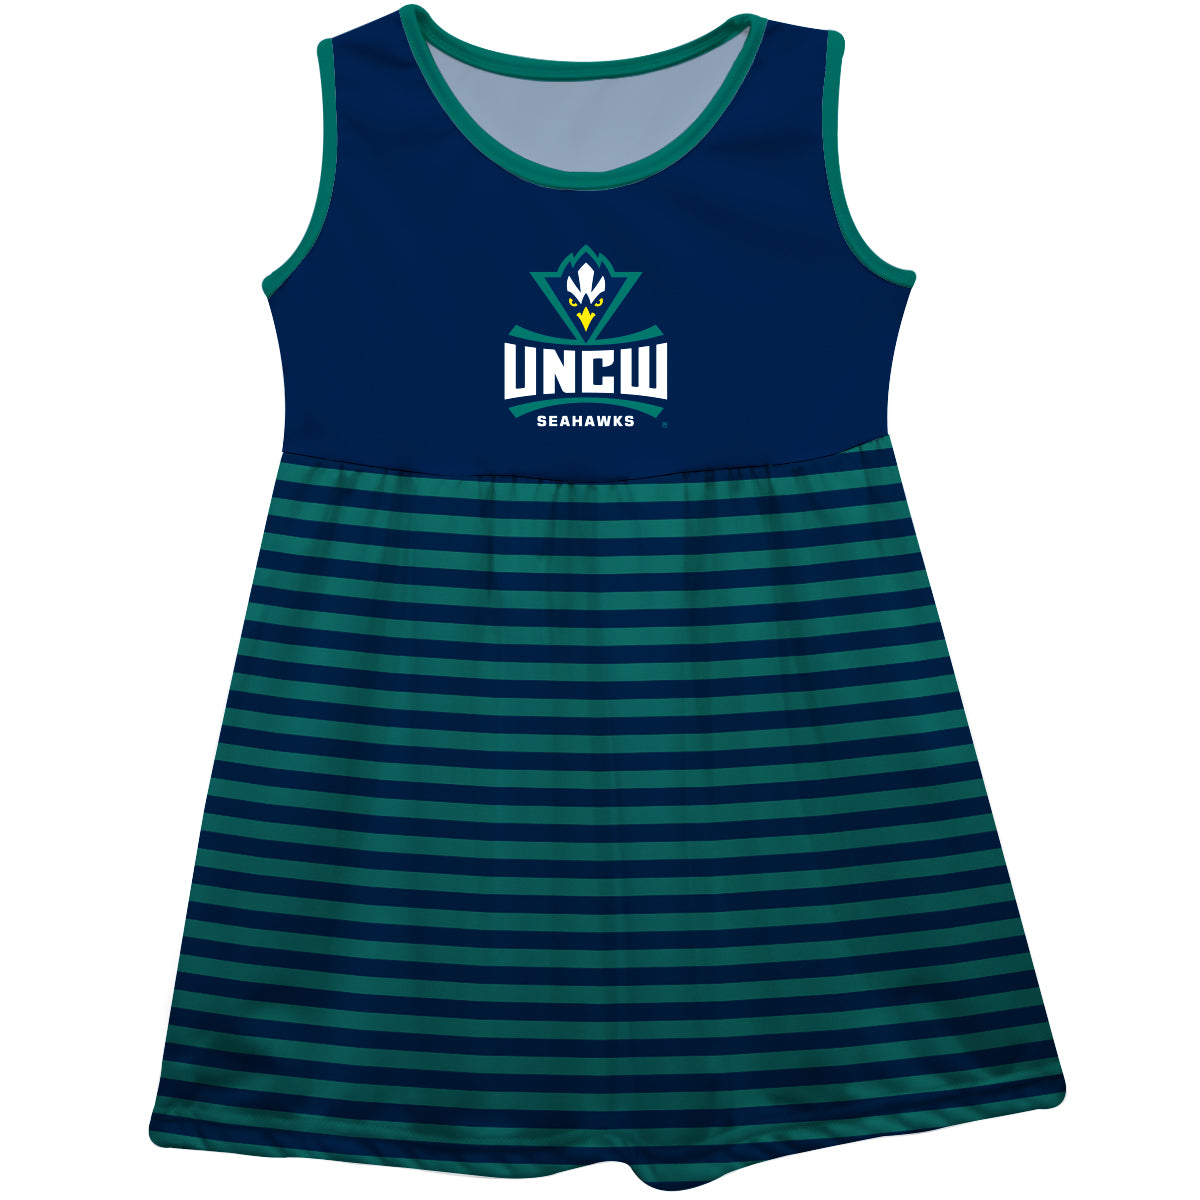 University of North Carolina Seahawks UNCW Navy and Teal Sleeveless Tank Dress with Stripes on Skirt by Vive La Fete-Campus-Wardrobe